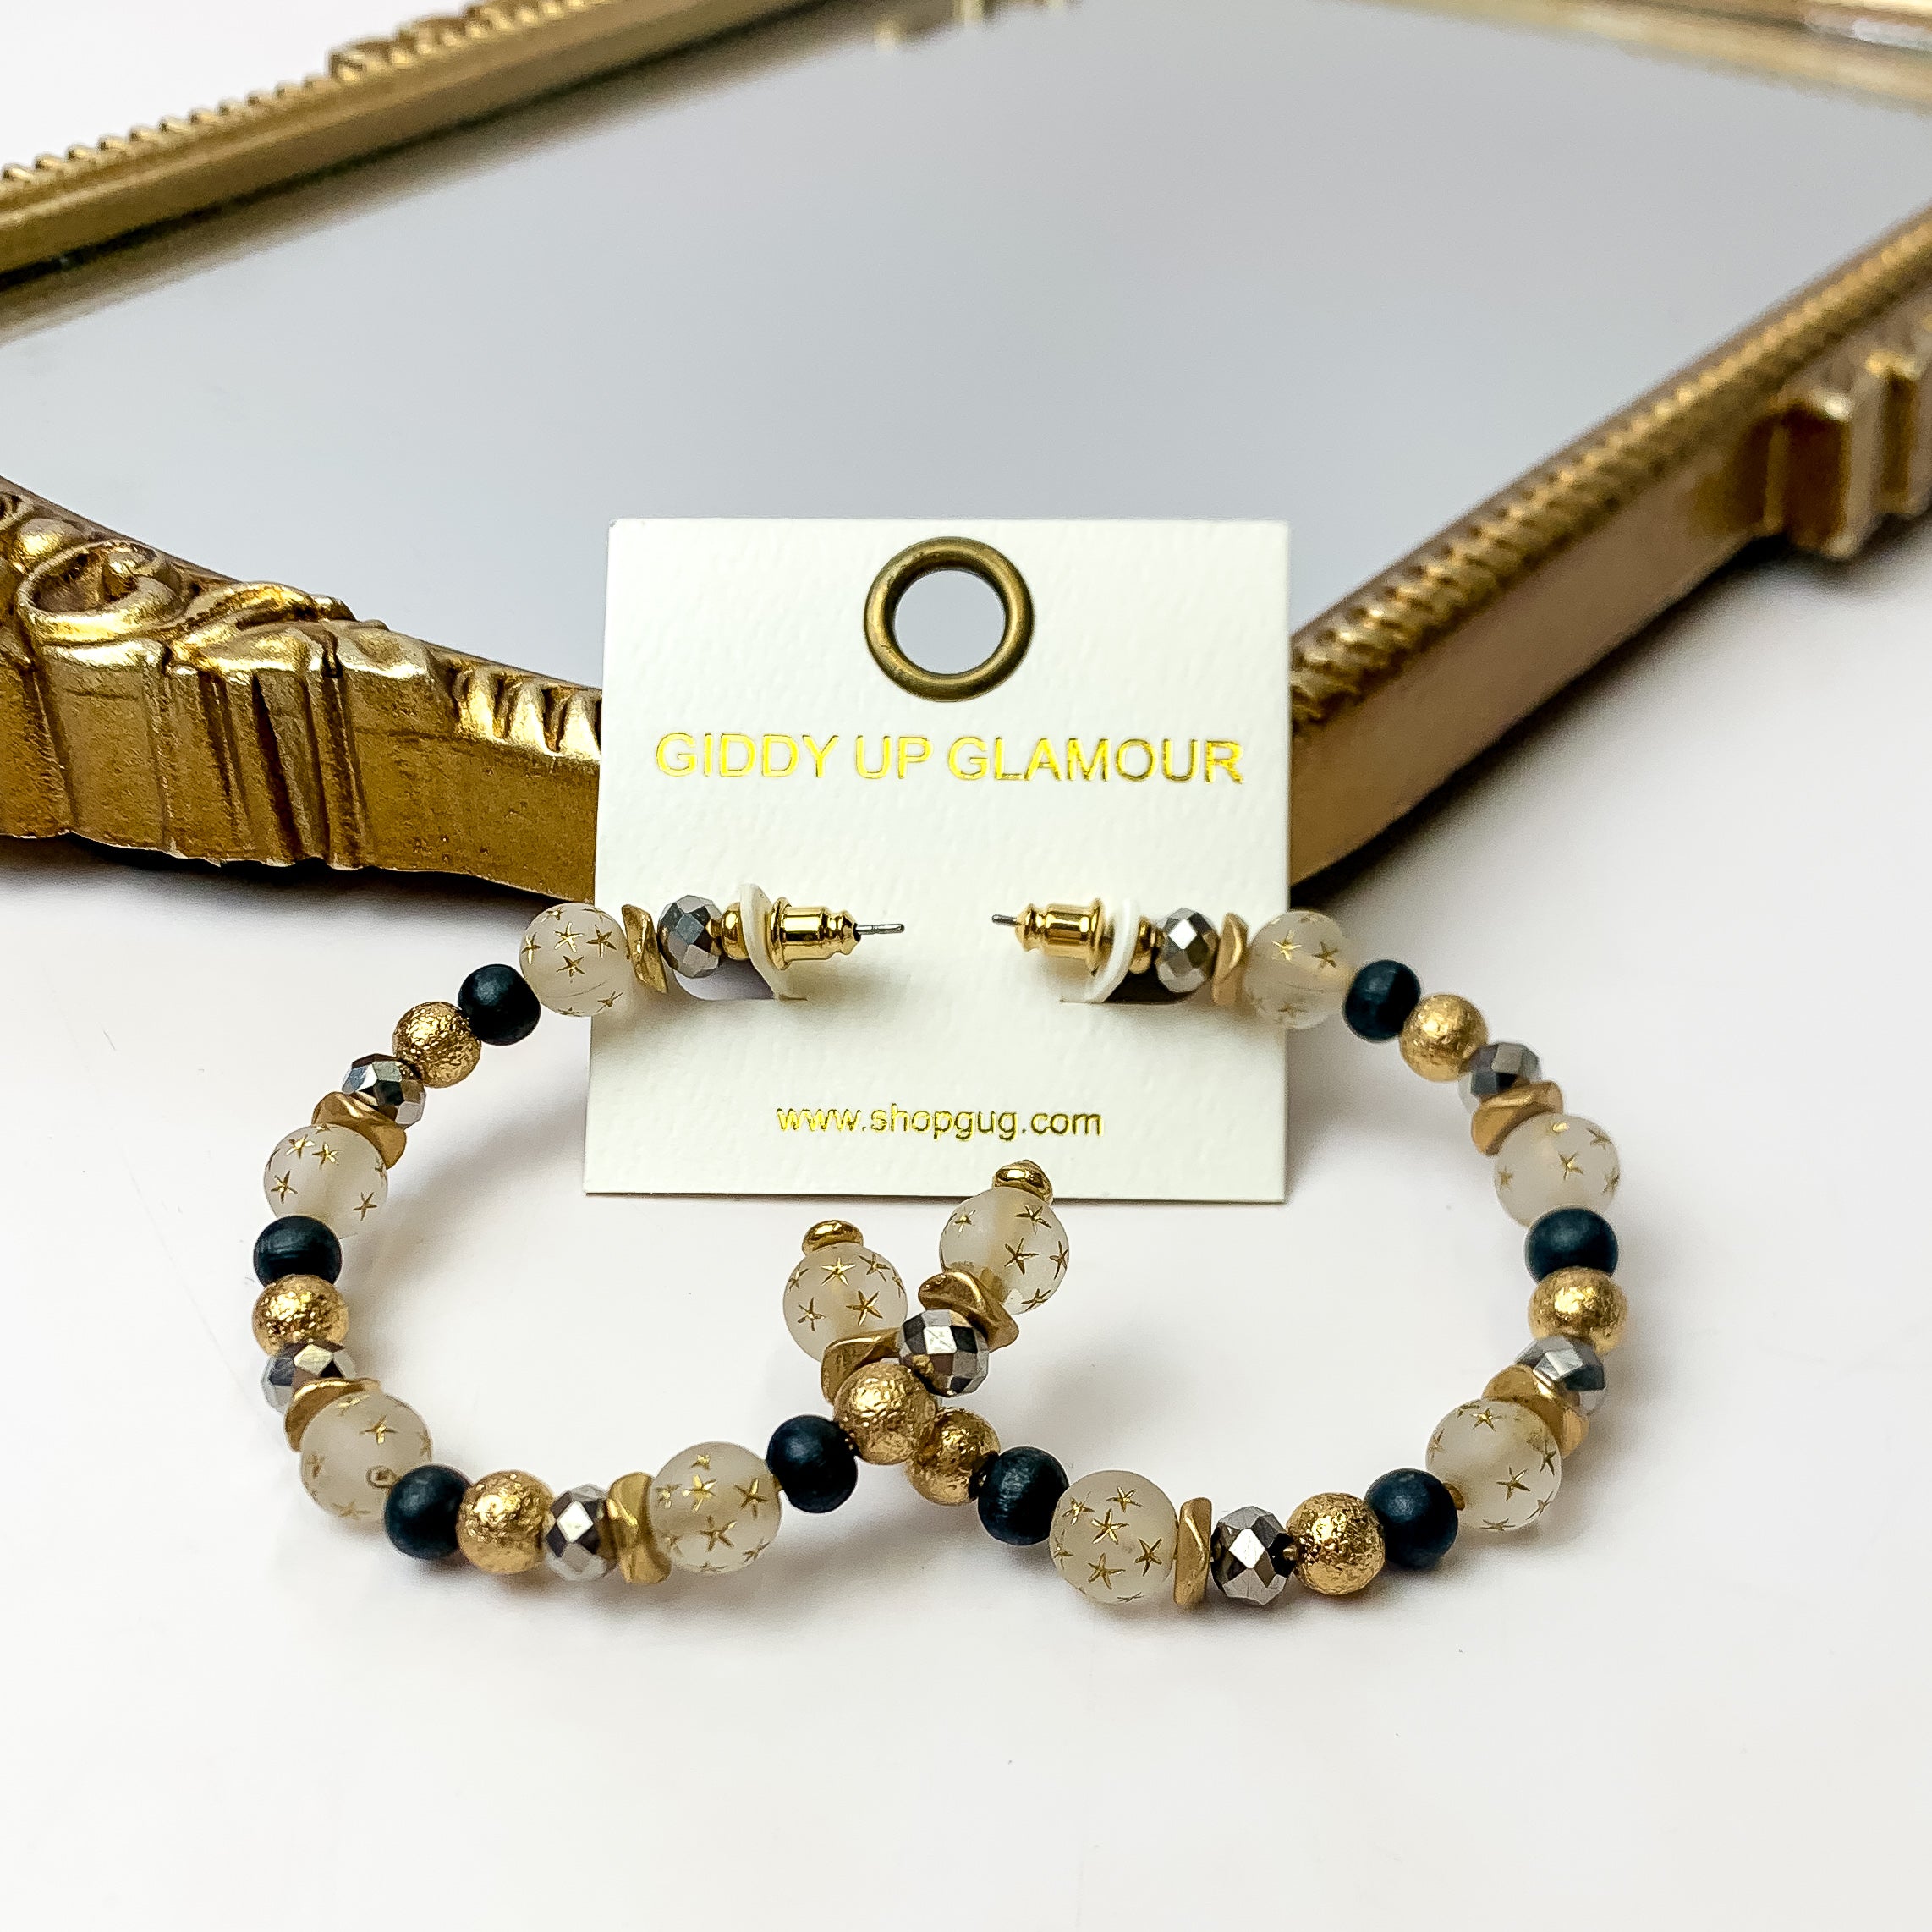 A pair of black and gold hoop earrings featuring gold stars on an ivory earring card. These earrings are pictured with a white background and gold mirror.